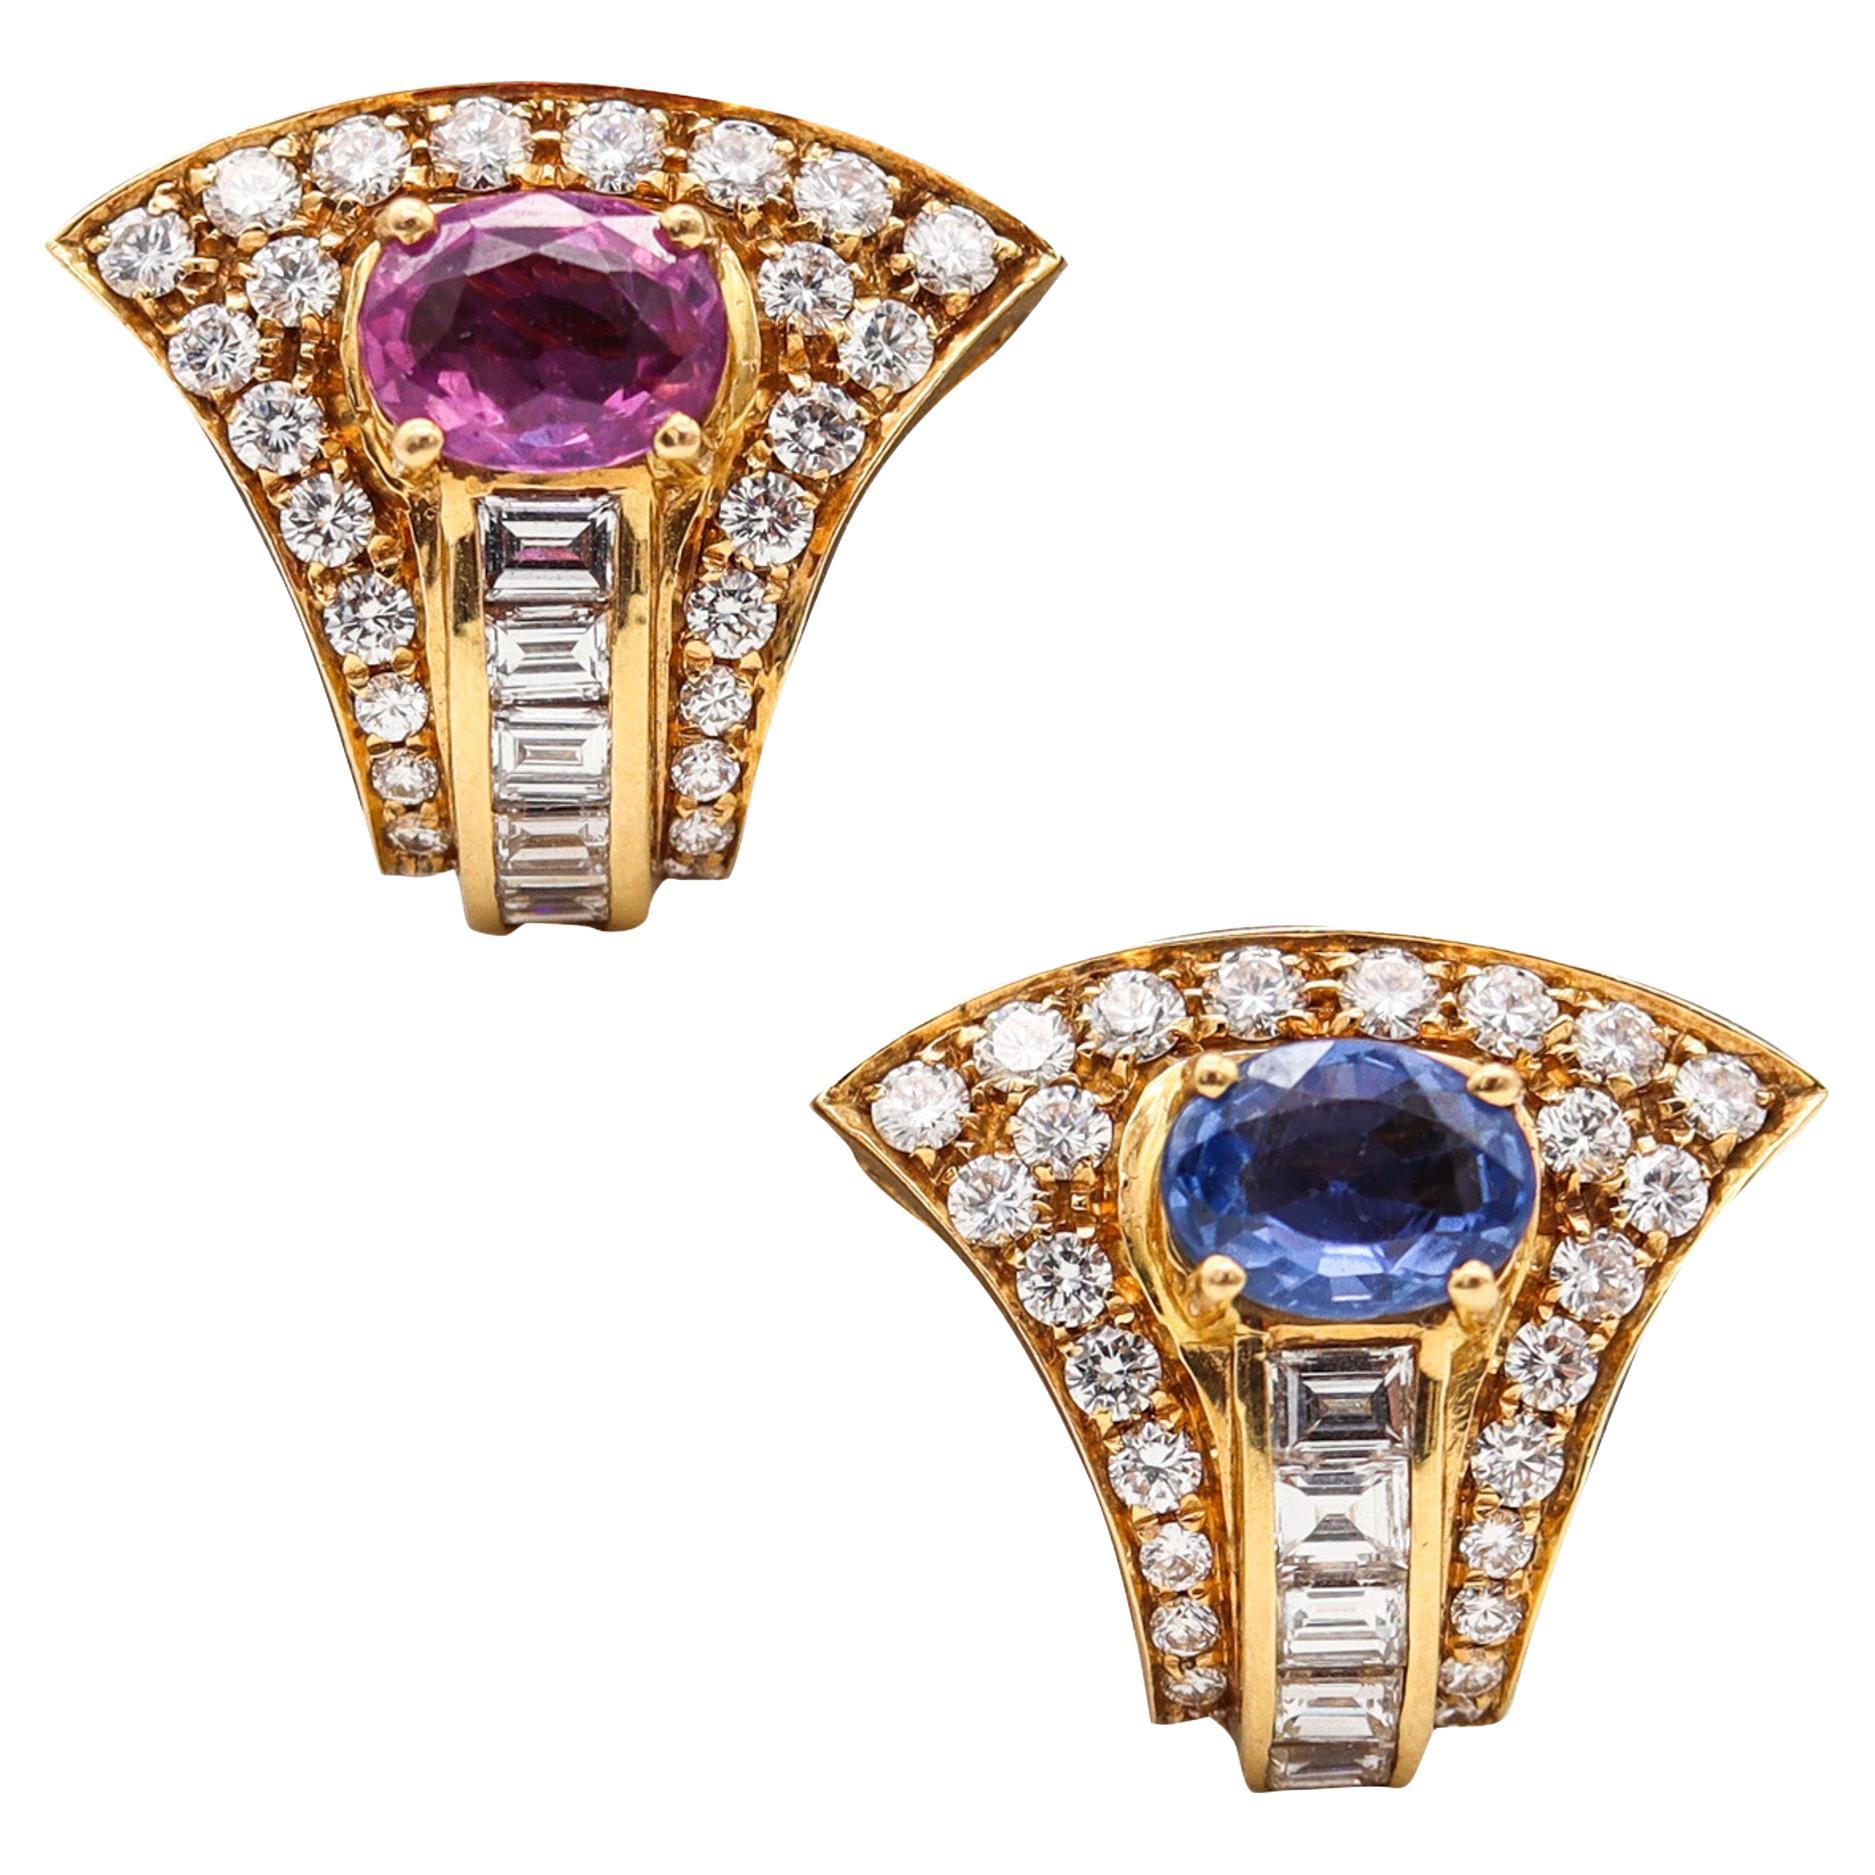 Bvlgari Clip On Earrings In 18Kt Yellow Gold With 8.93 Ctw Diamonds & Sapphires